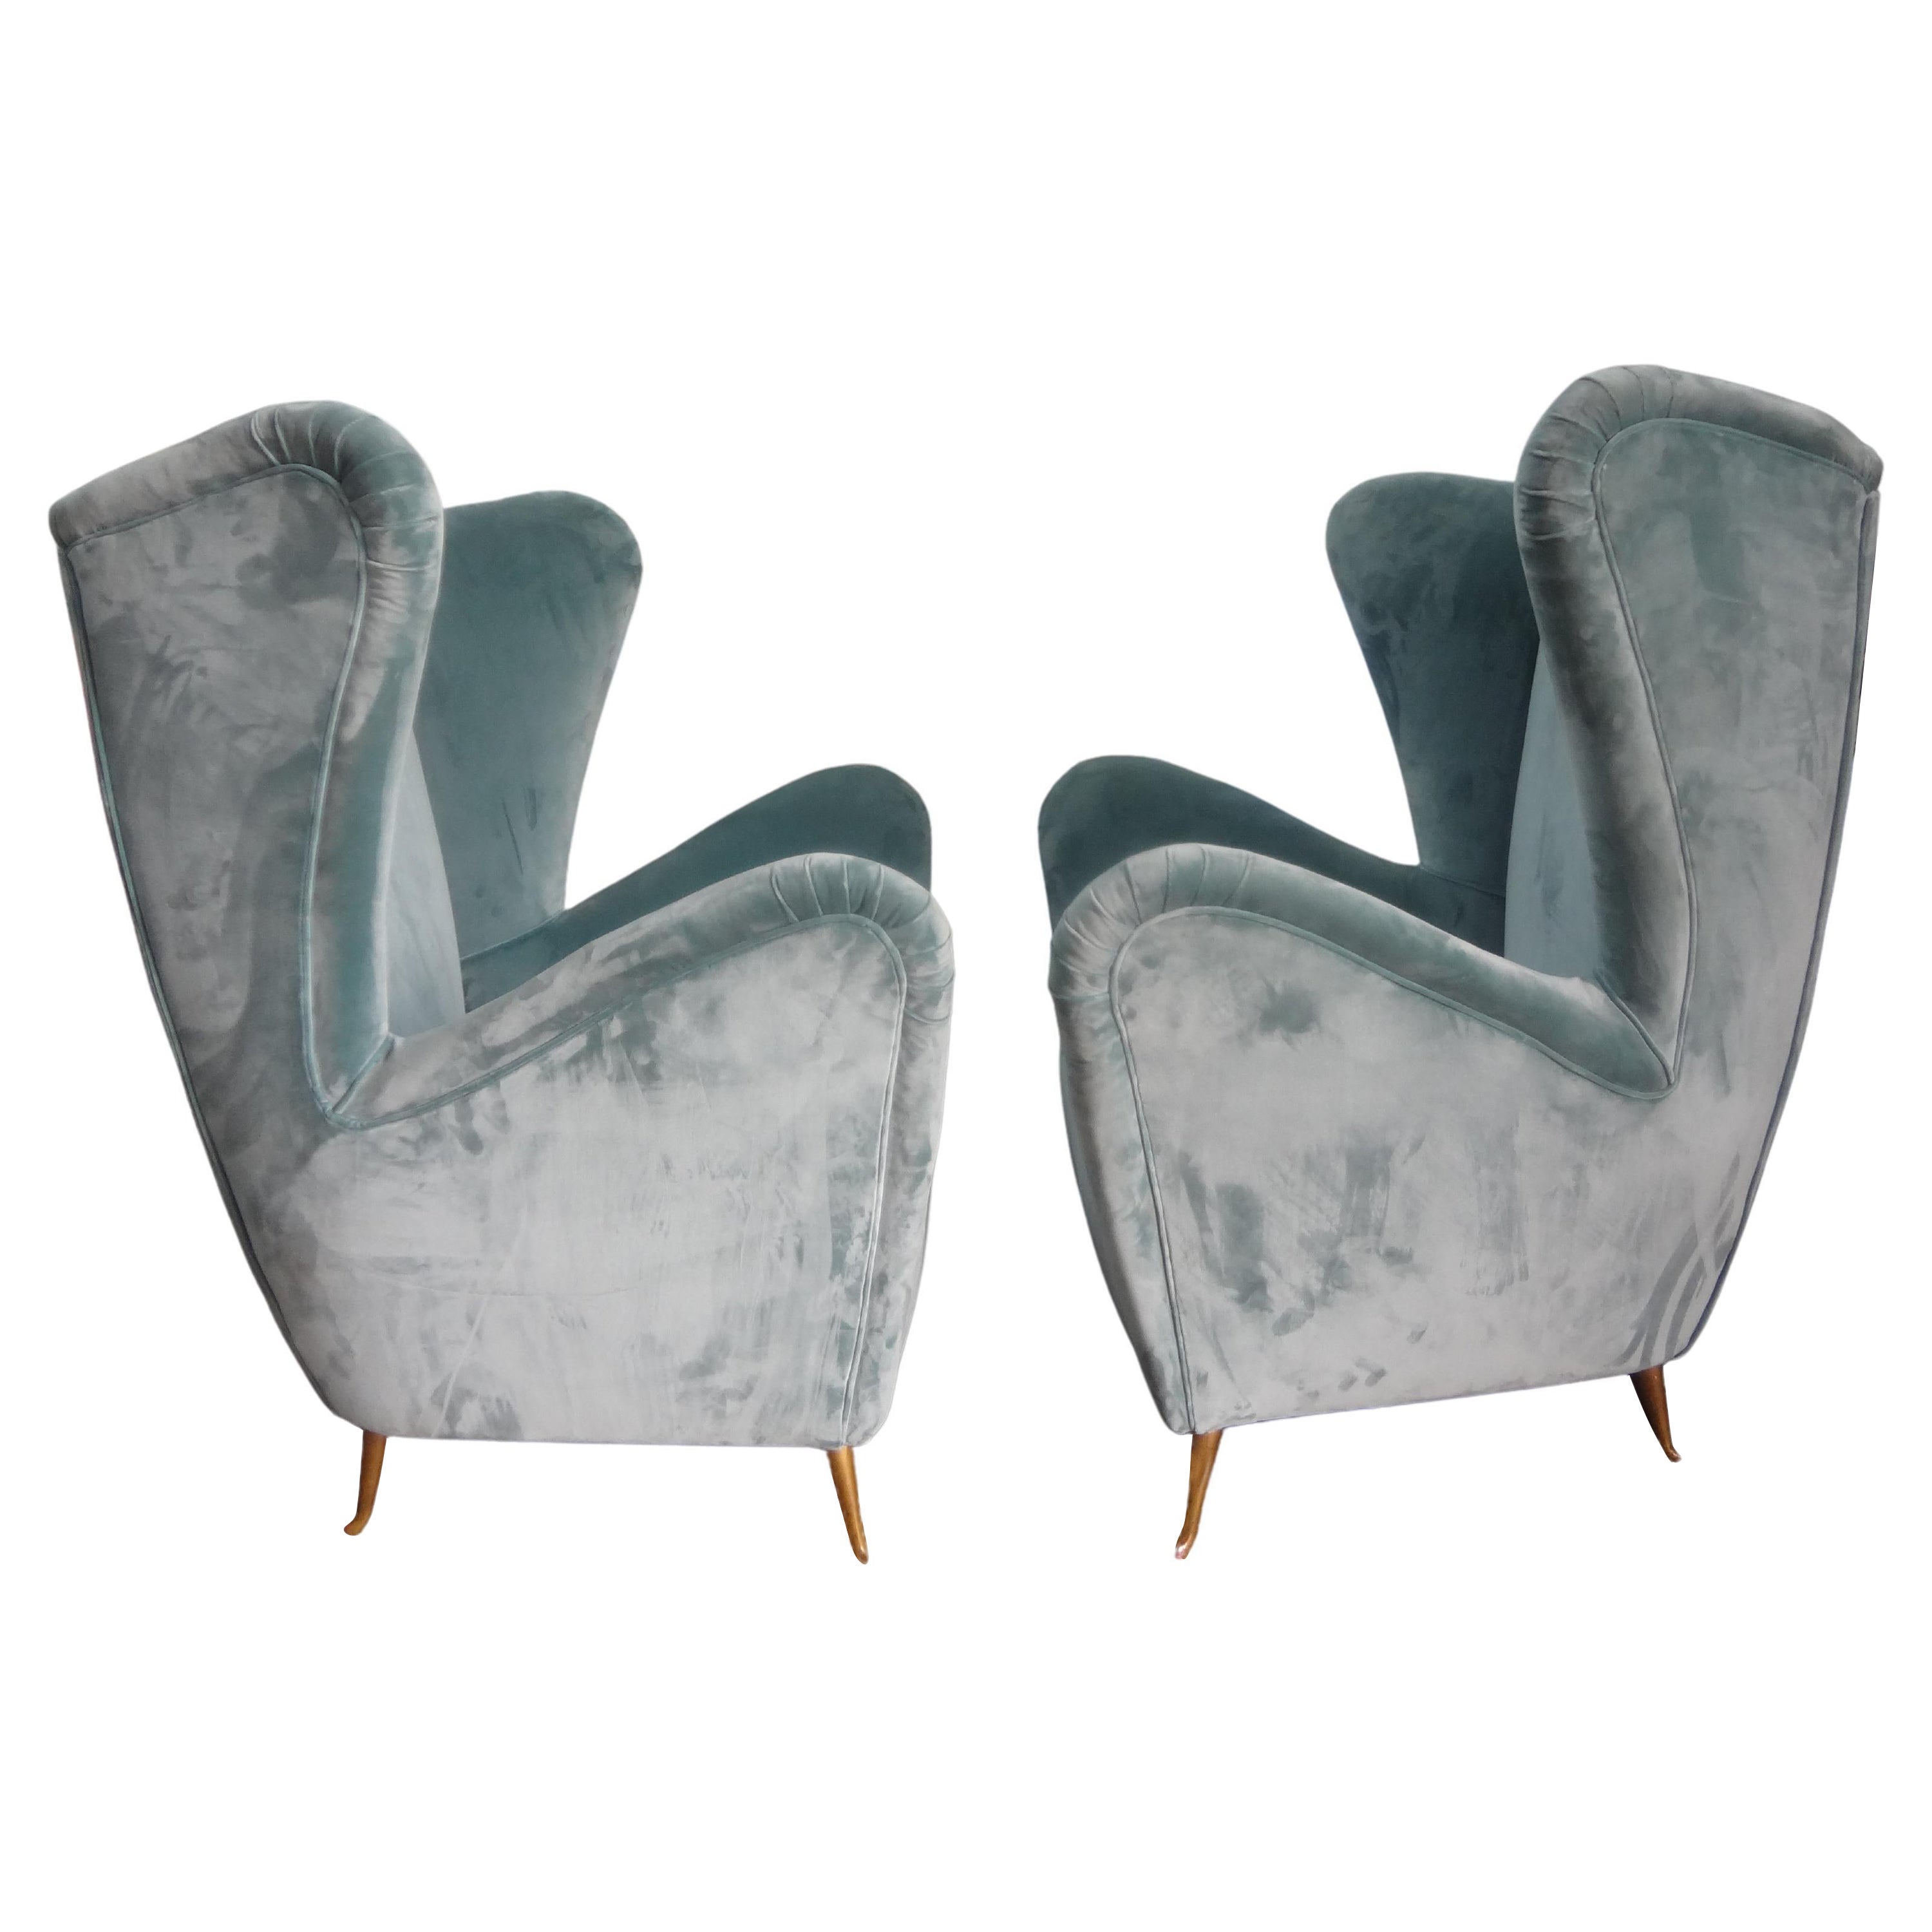 Pair of Italian Modern Sculptural Lounge Chairs Attributed to ISA Bergamo